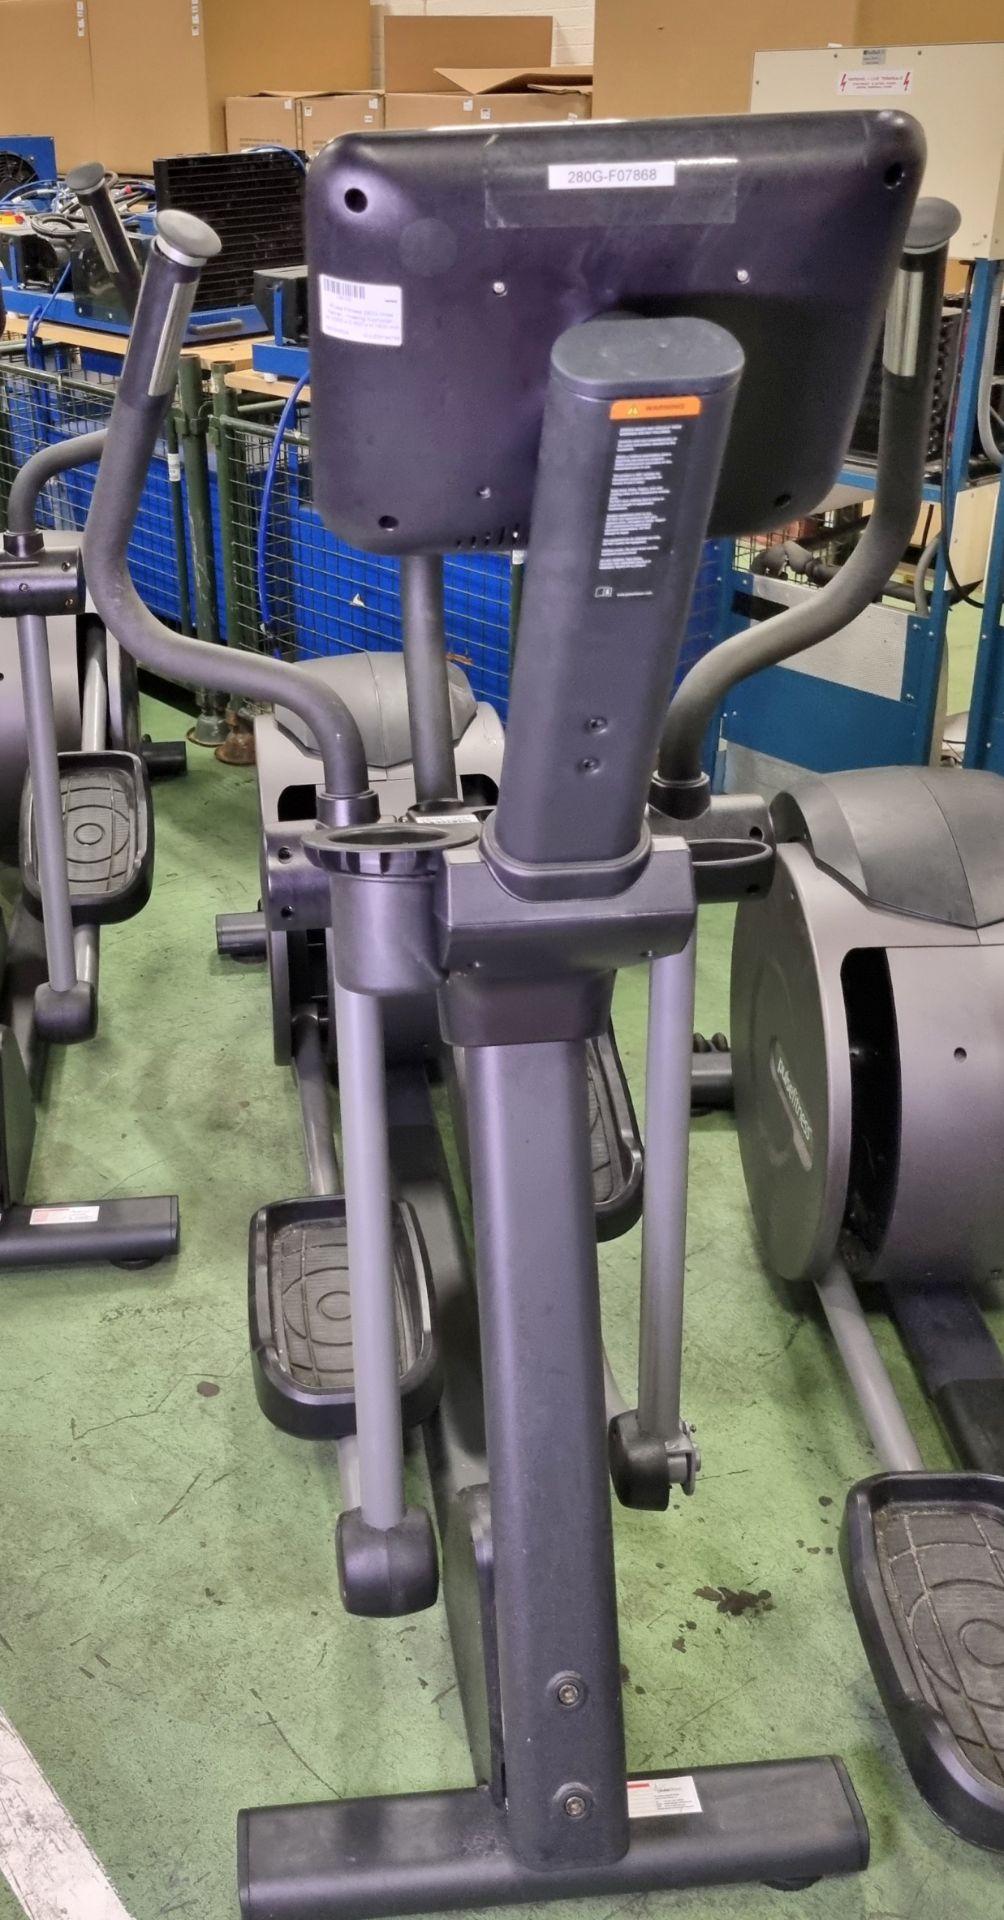 Pulse Fitness 280G cross trainer - missing cup holder - W 2250 x D 600 x H 1600 mm - Image 2 of 8